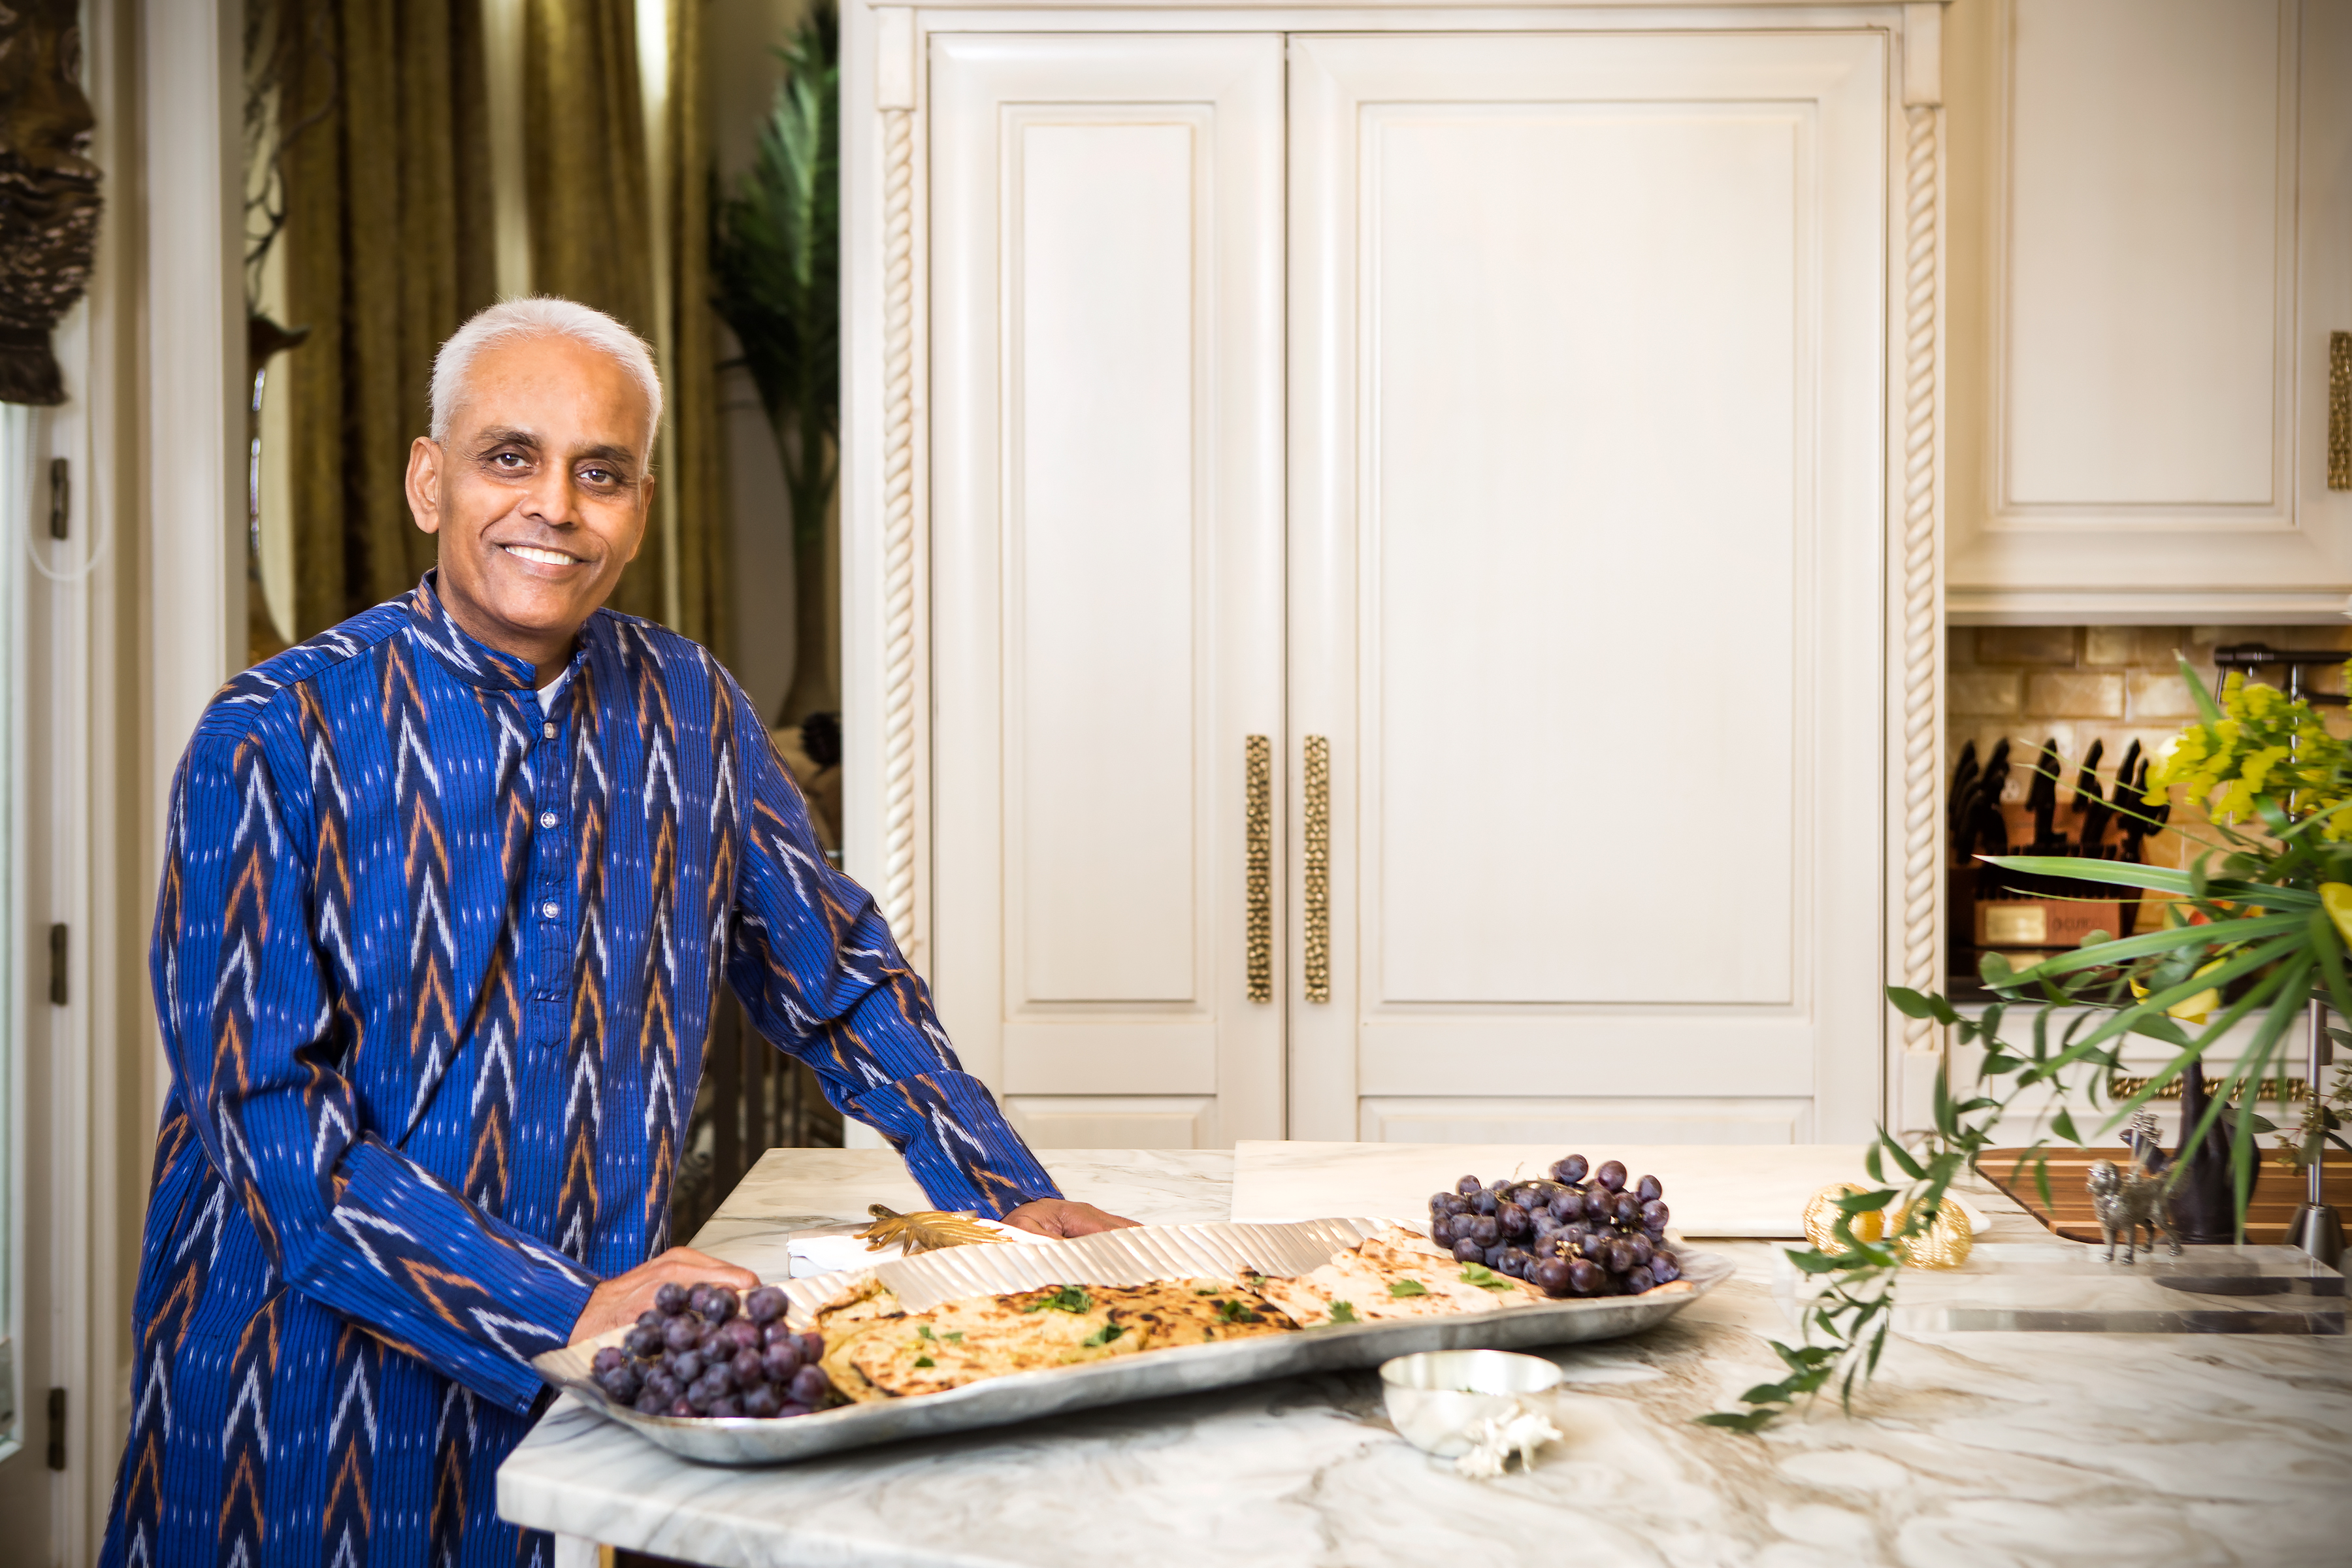 Raj Aluri — who is also from India, but has lived in Columbia for 43 years — wears the traditional kurta. Flatbread is a traditional Indian appetizer. 
